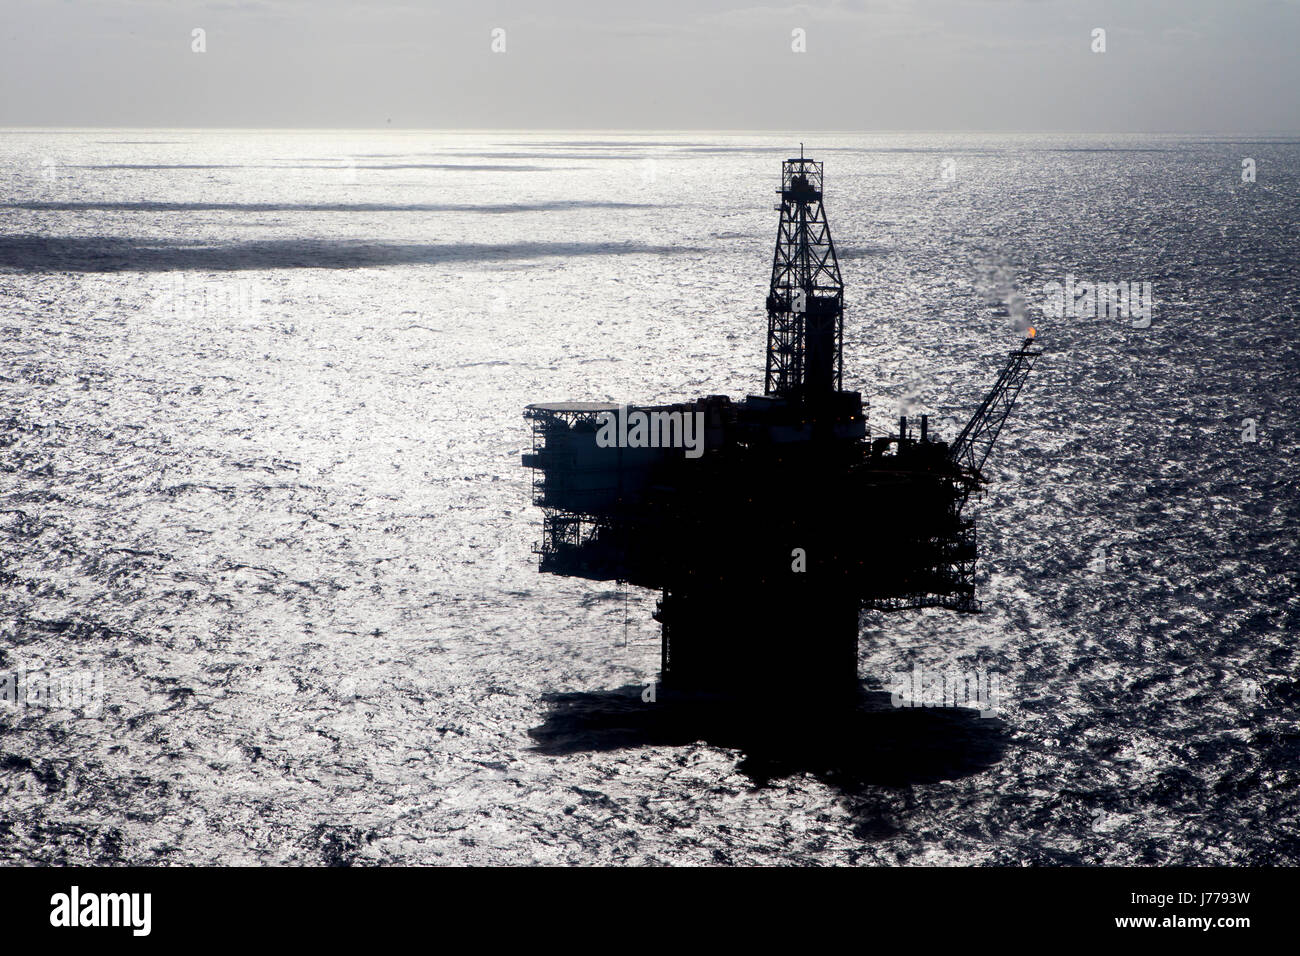 Silhouette oil platform in sea on sunny day Stock Photo